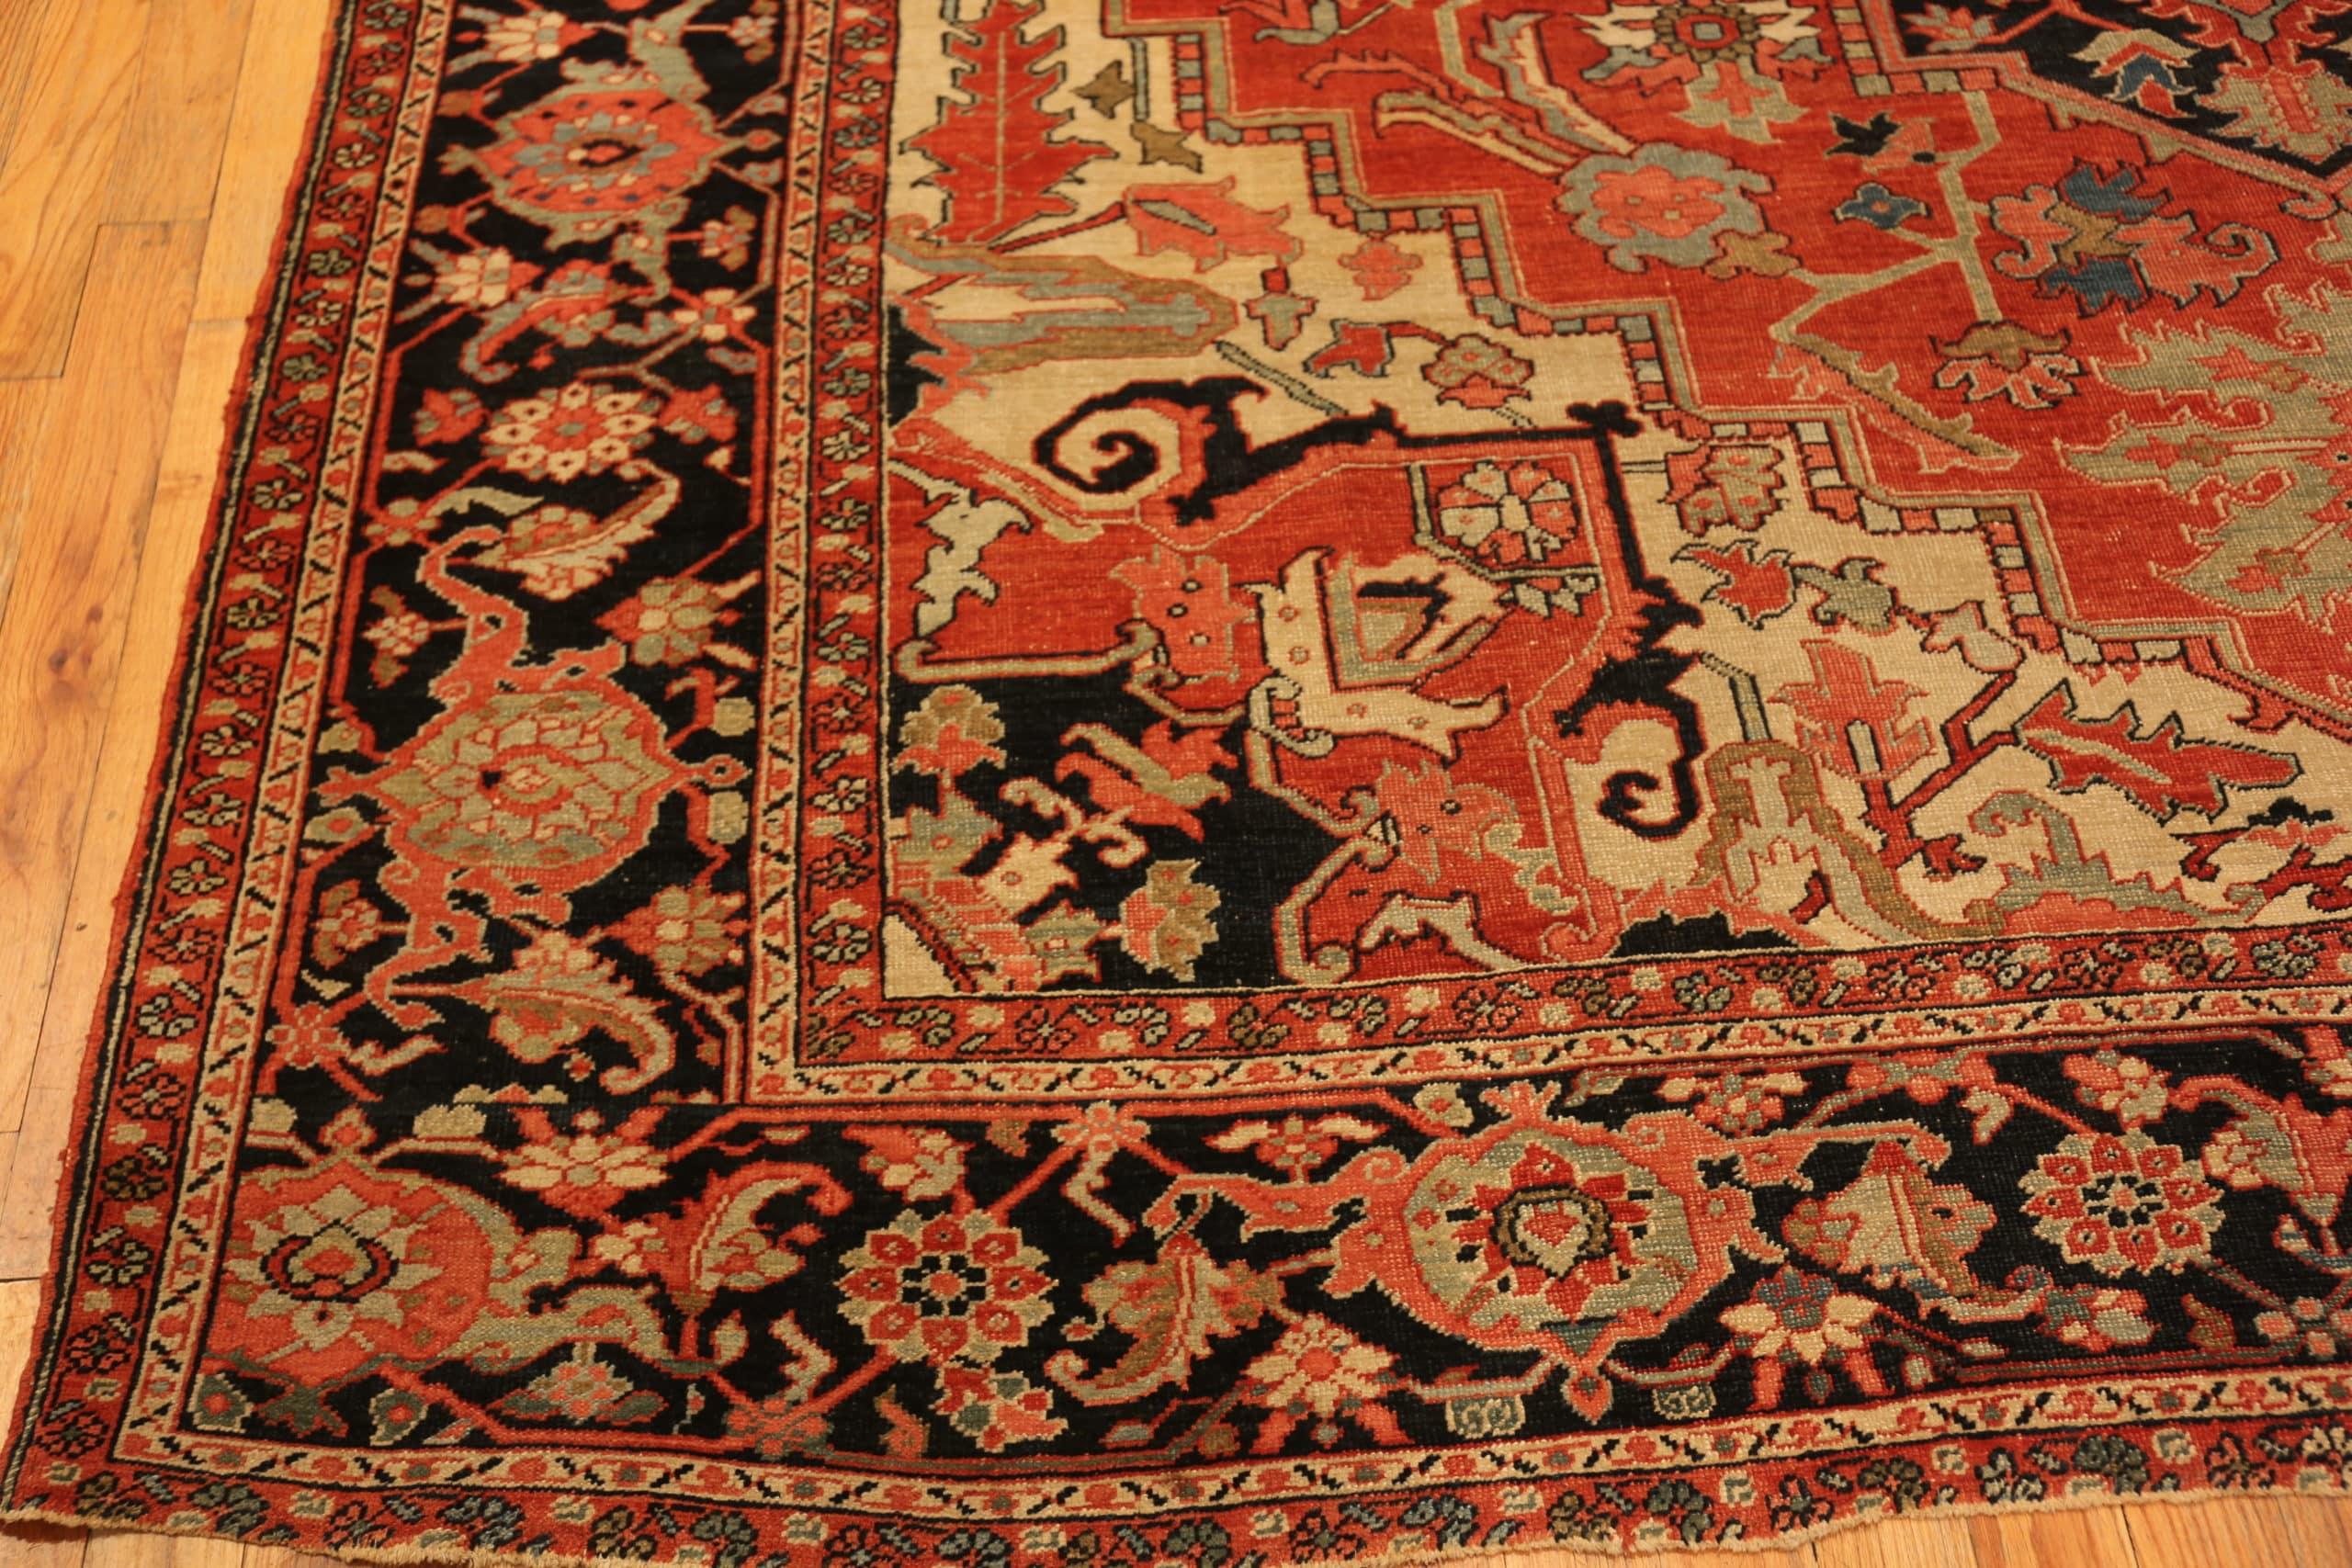 Hand-Knotted Antique Persian Serapi Rug. Size: 10 ft 4 in x 13 ft 2 in